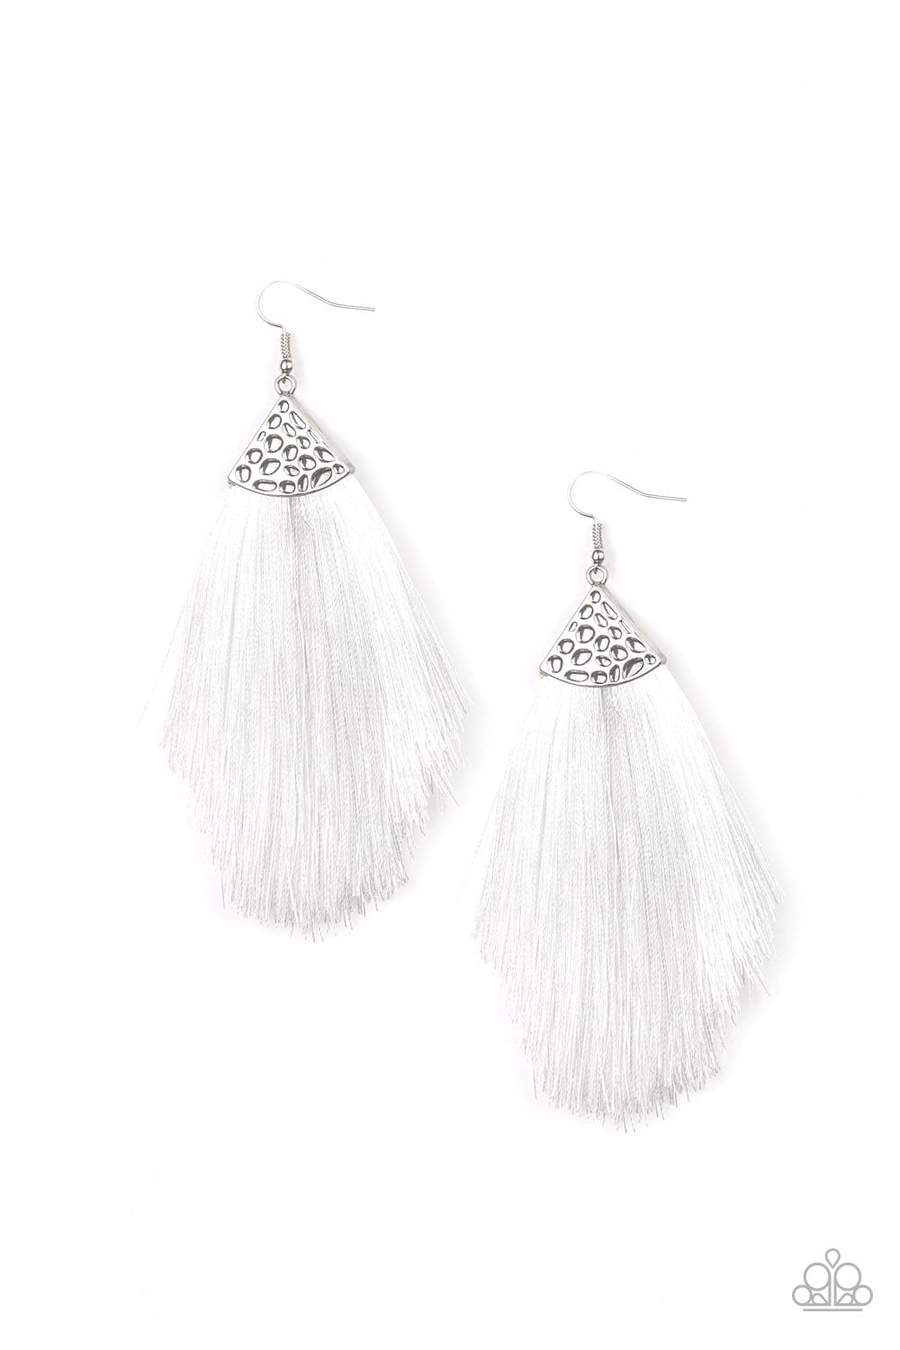 Paparazzi Accessories Tassel Tempo - White Earrings - Lady T Accessories